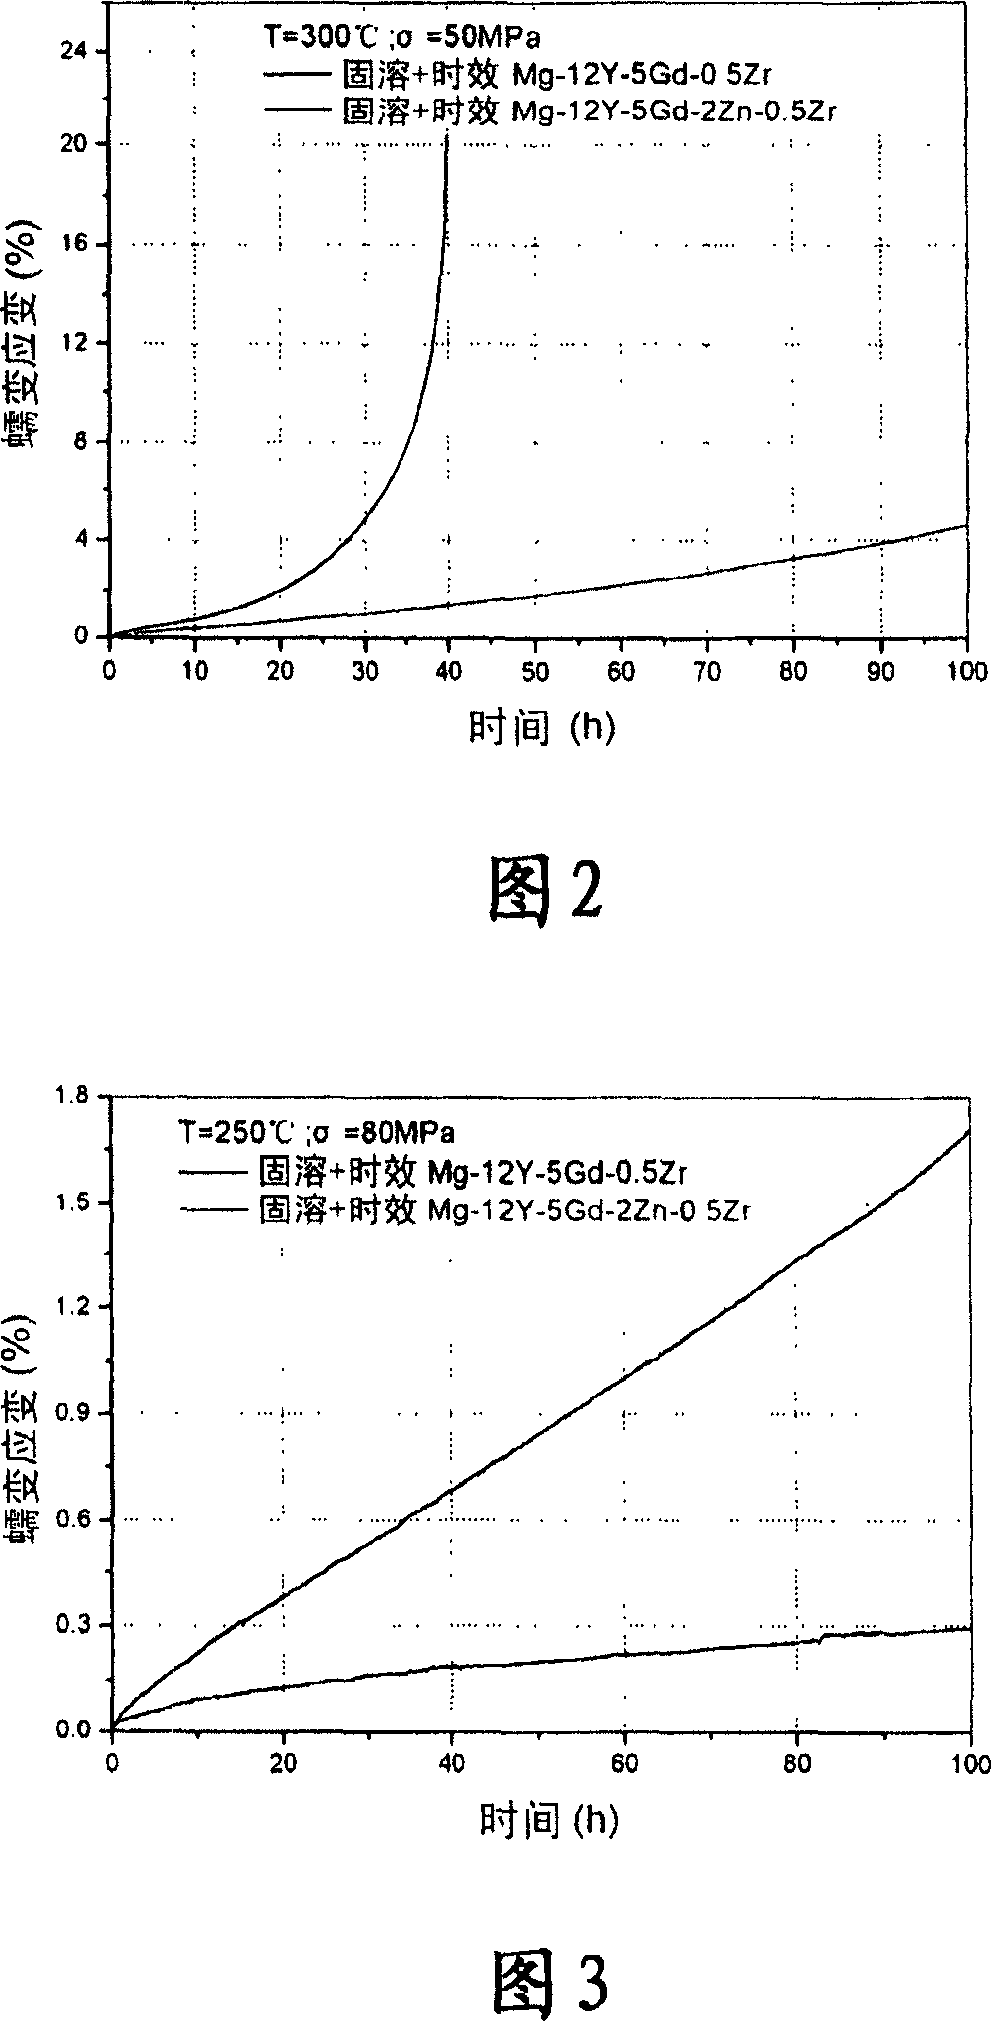 High-strength creep resistant magnesium alloy and method of producing the same